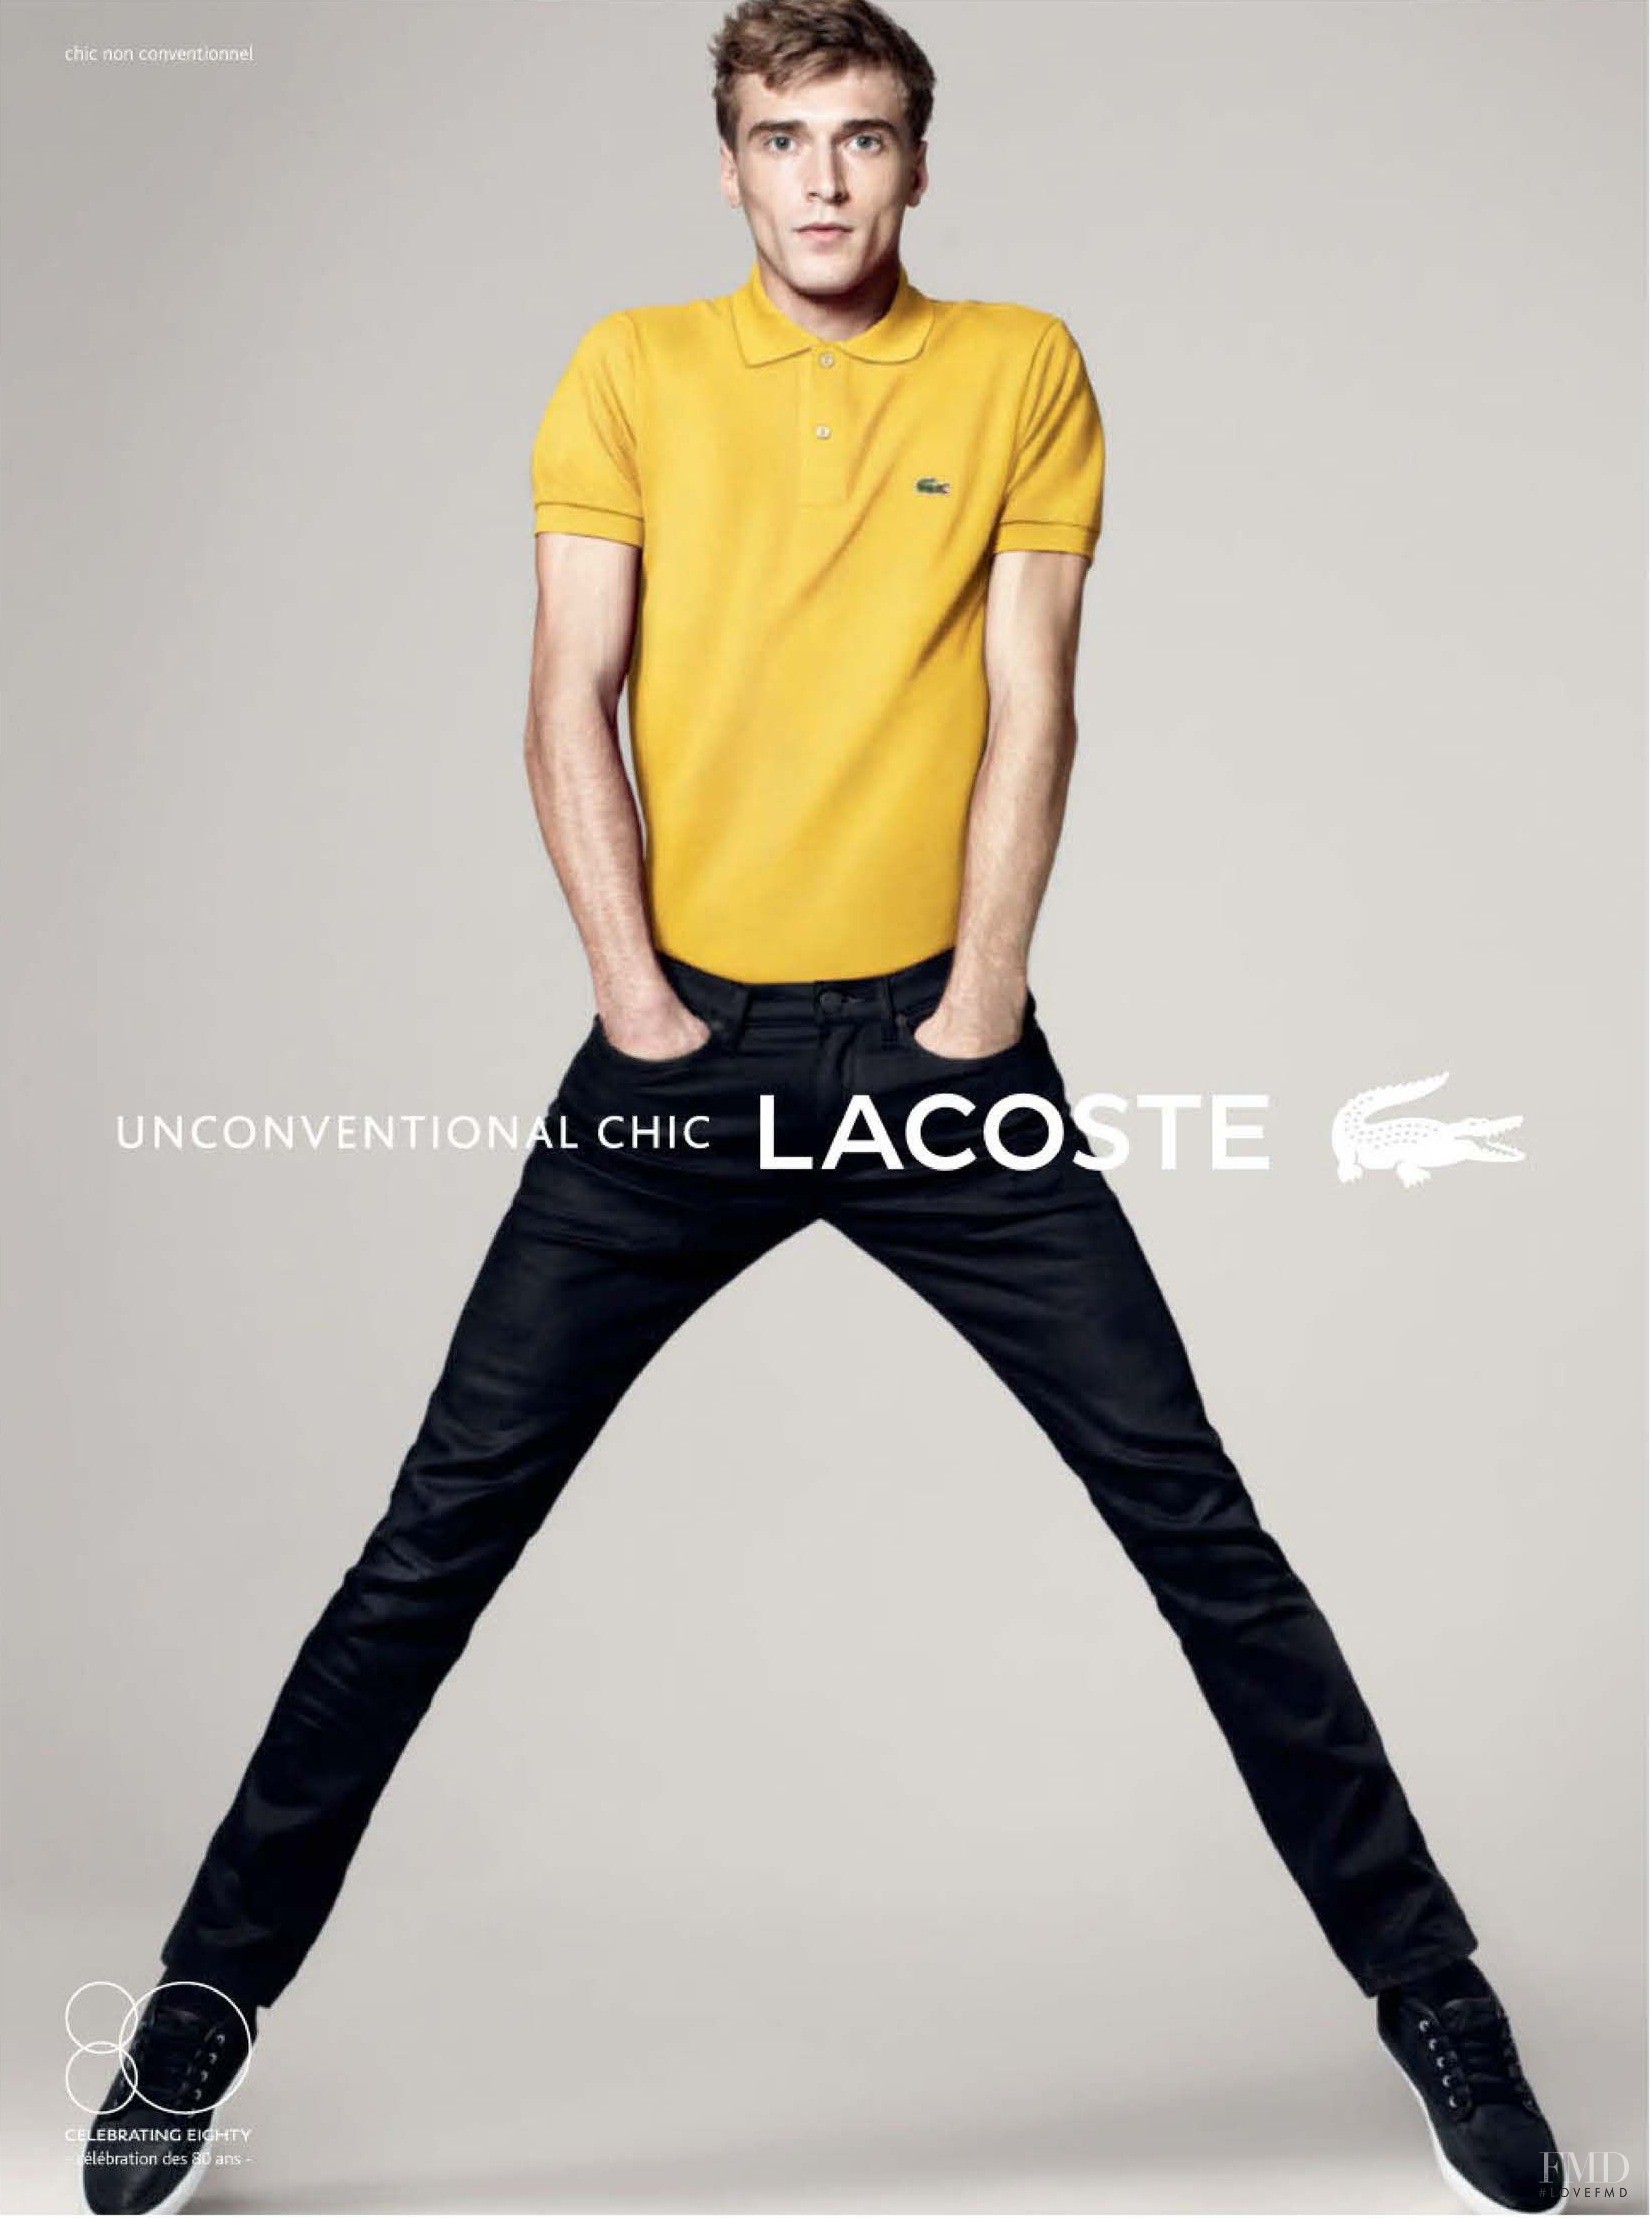 Hest smidig Haiku Photo - Lacoste - Spring/Summer 2013 Ready-to-Wear - Fashion Advertisement  | Brands | The FMD